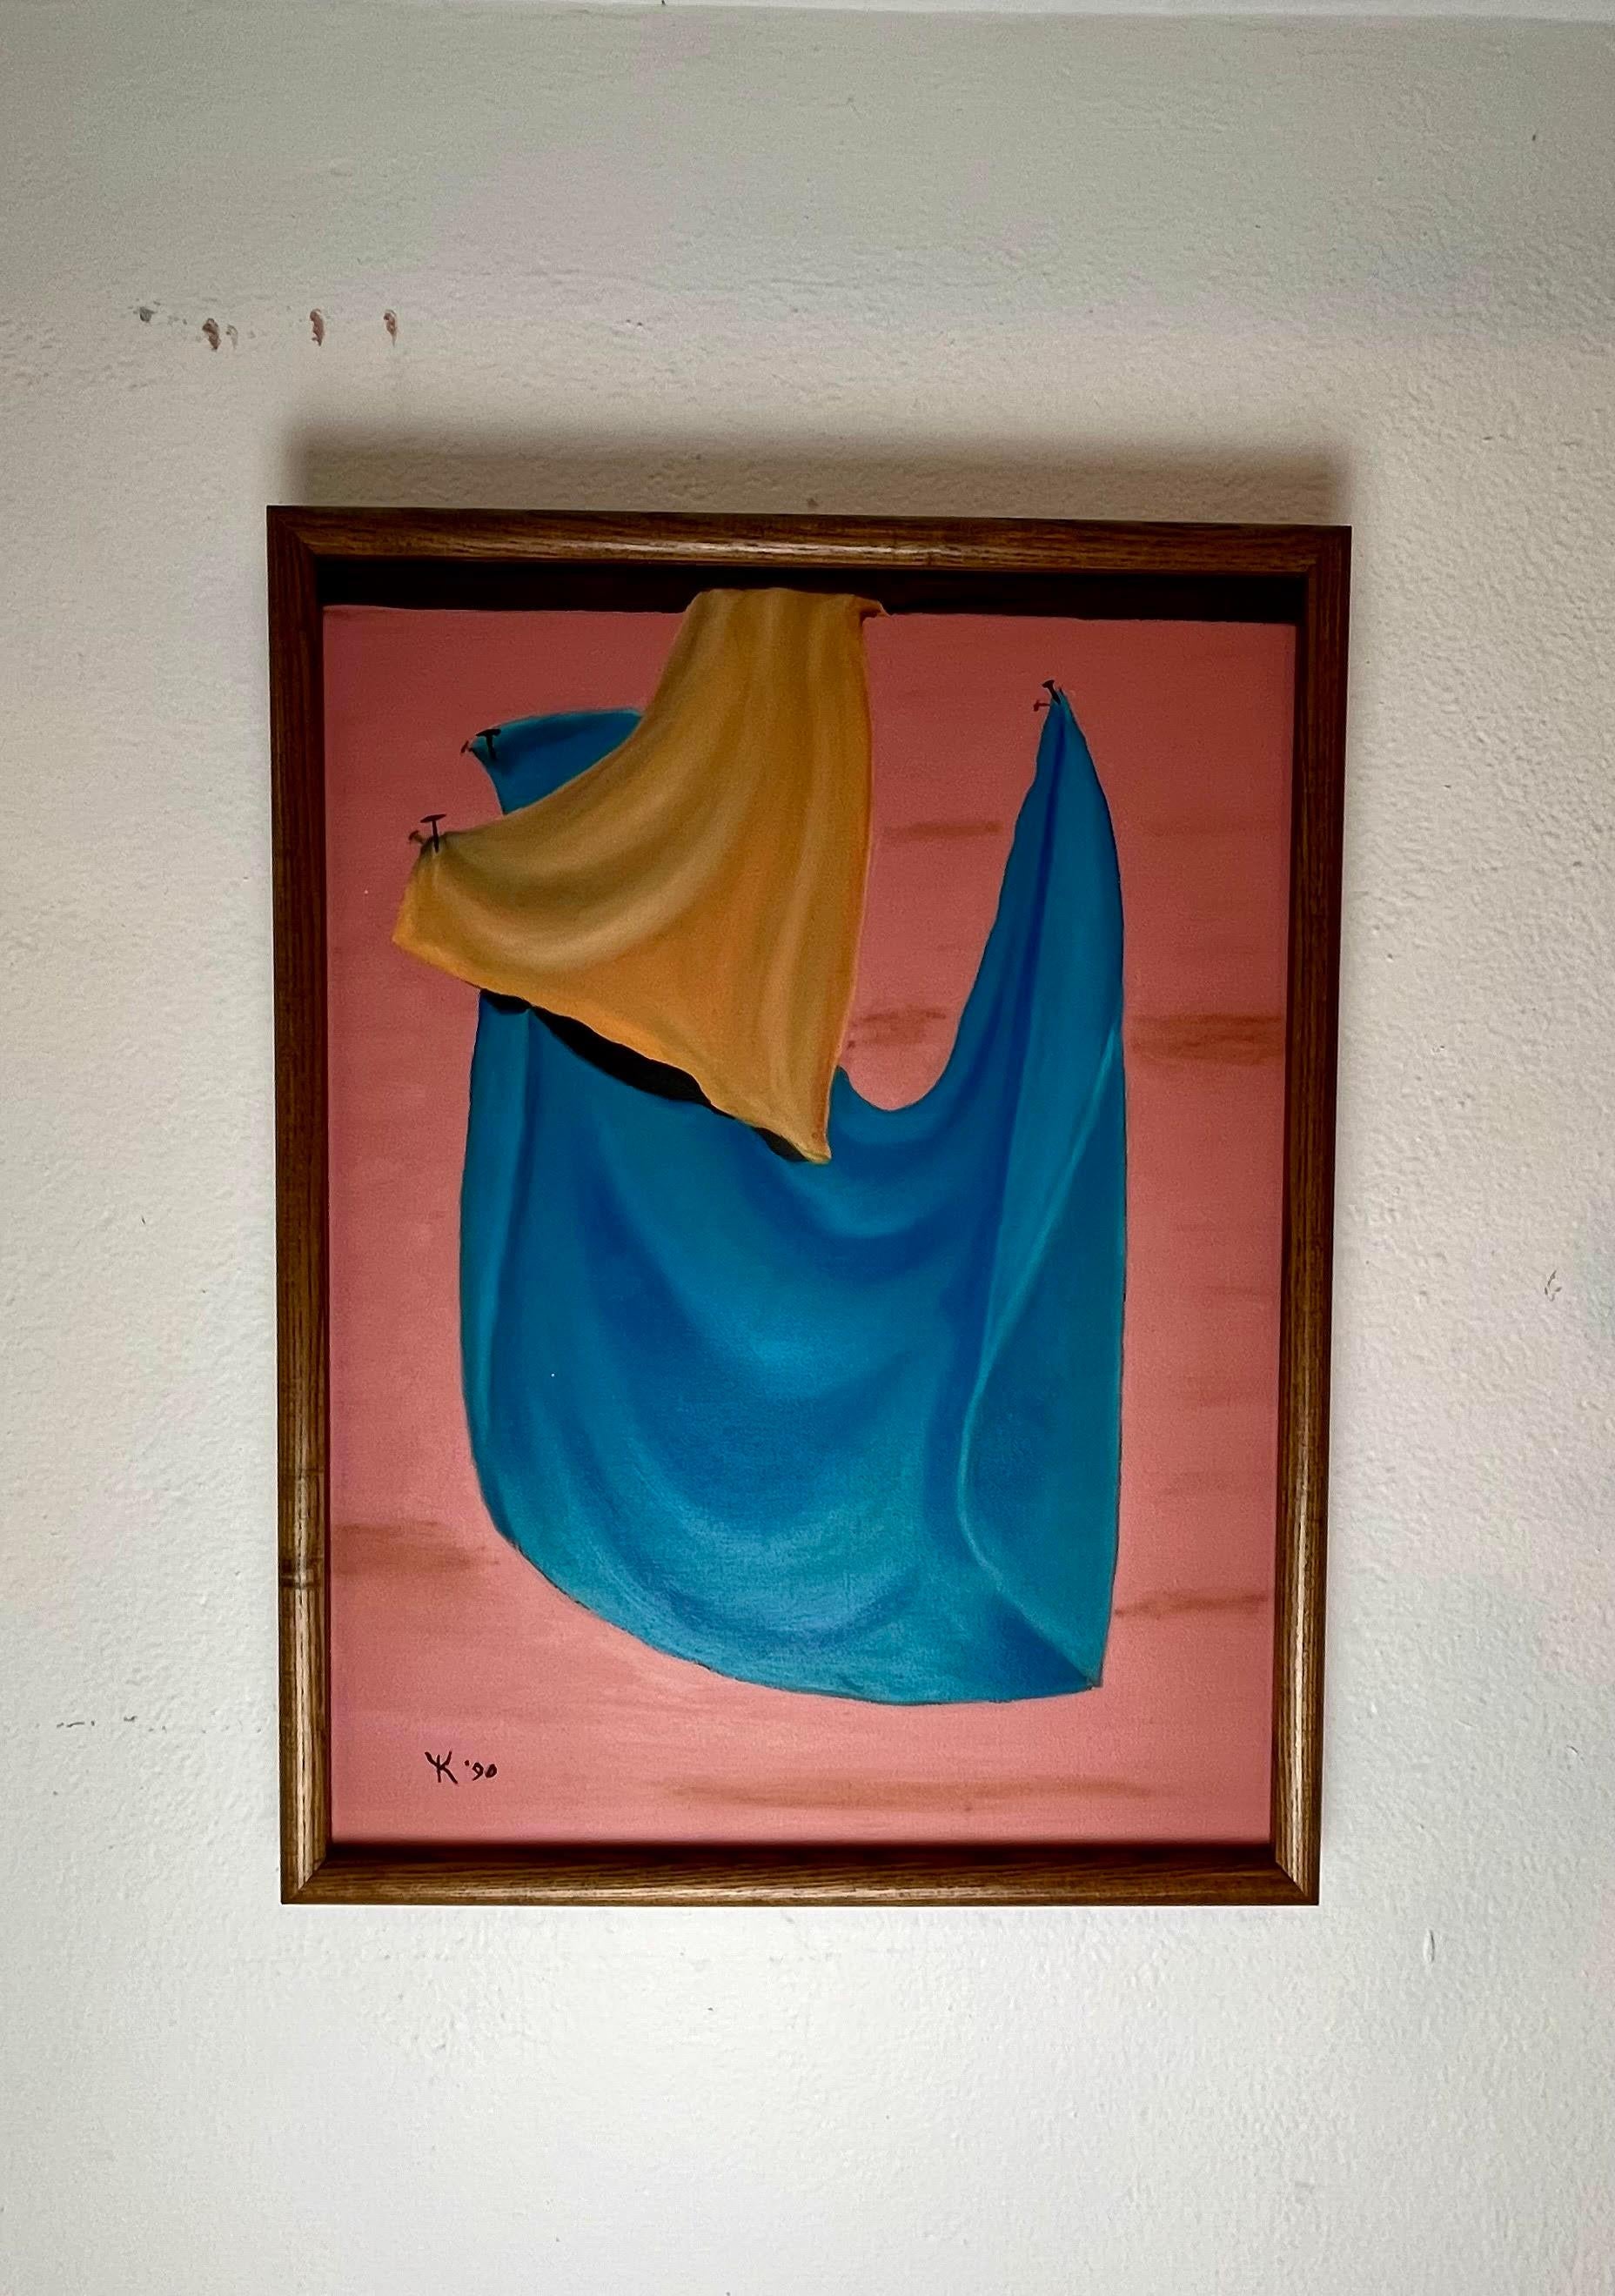 Unique student artist still life painting of laundry hanging out to dry. Interesting visual with great colors. Signed by artist '90